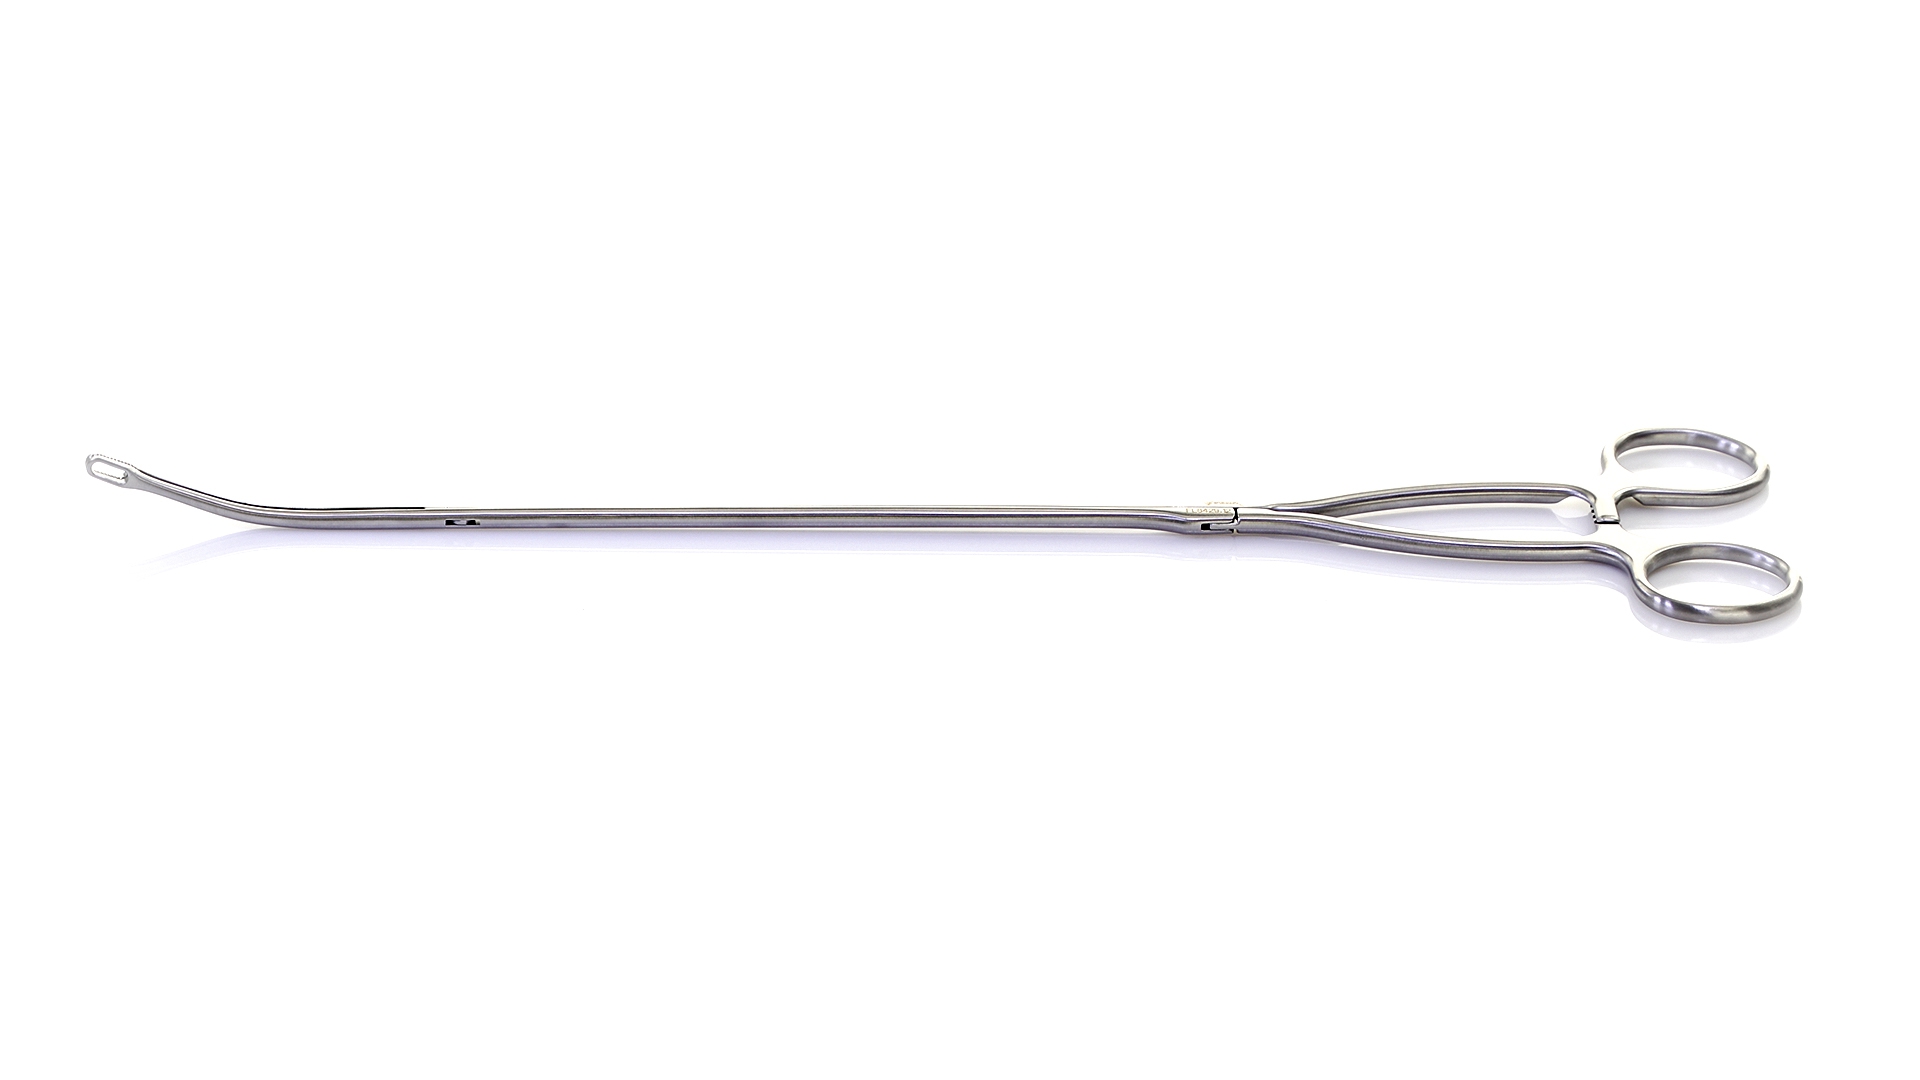 VATS Node Grasping Forceps - Curved Left 11mm Oblong Serrated jaws